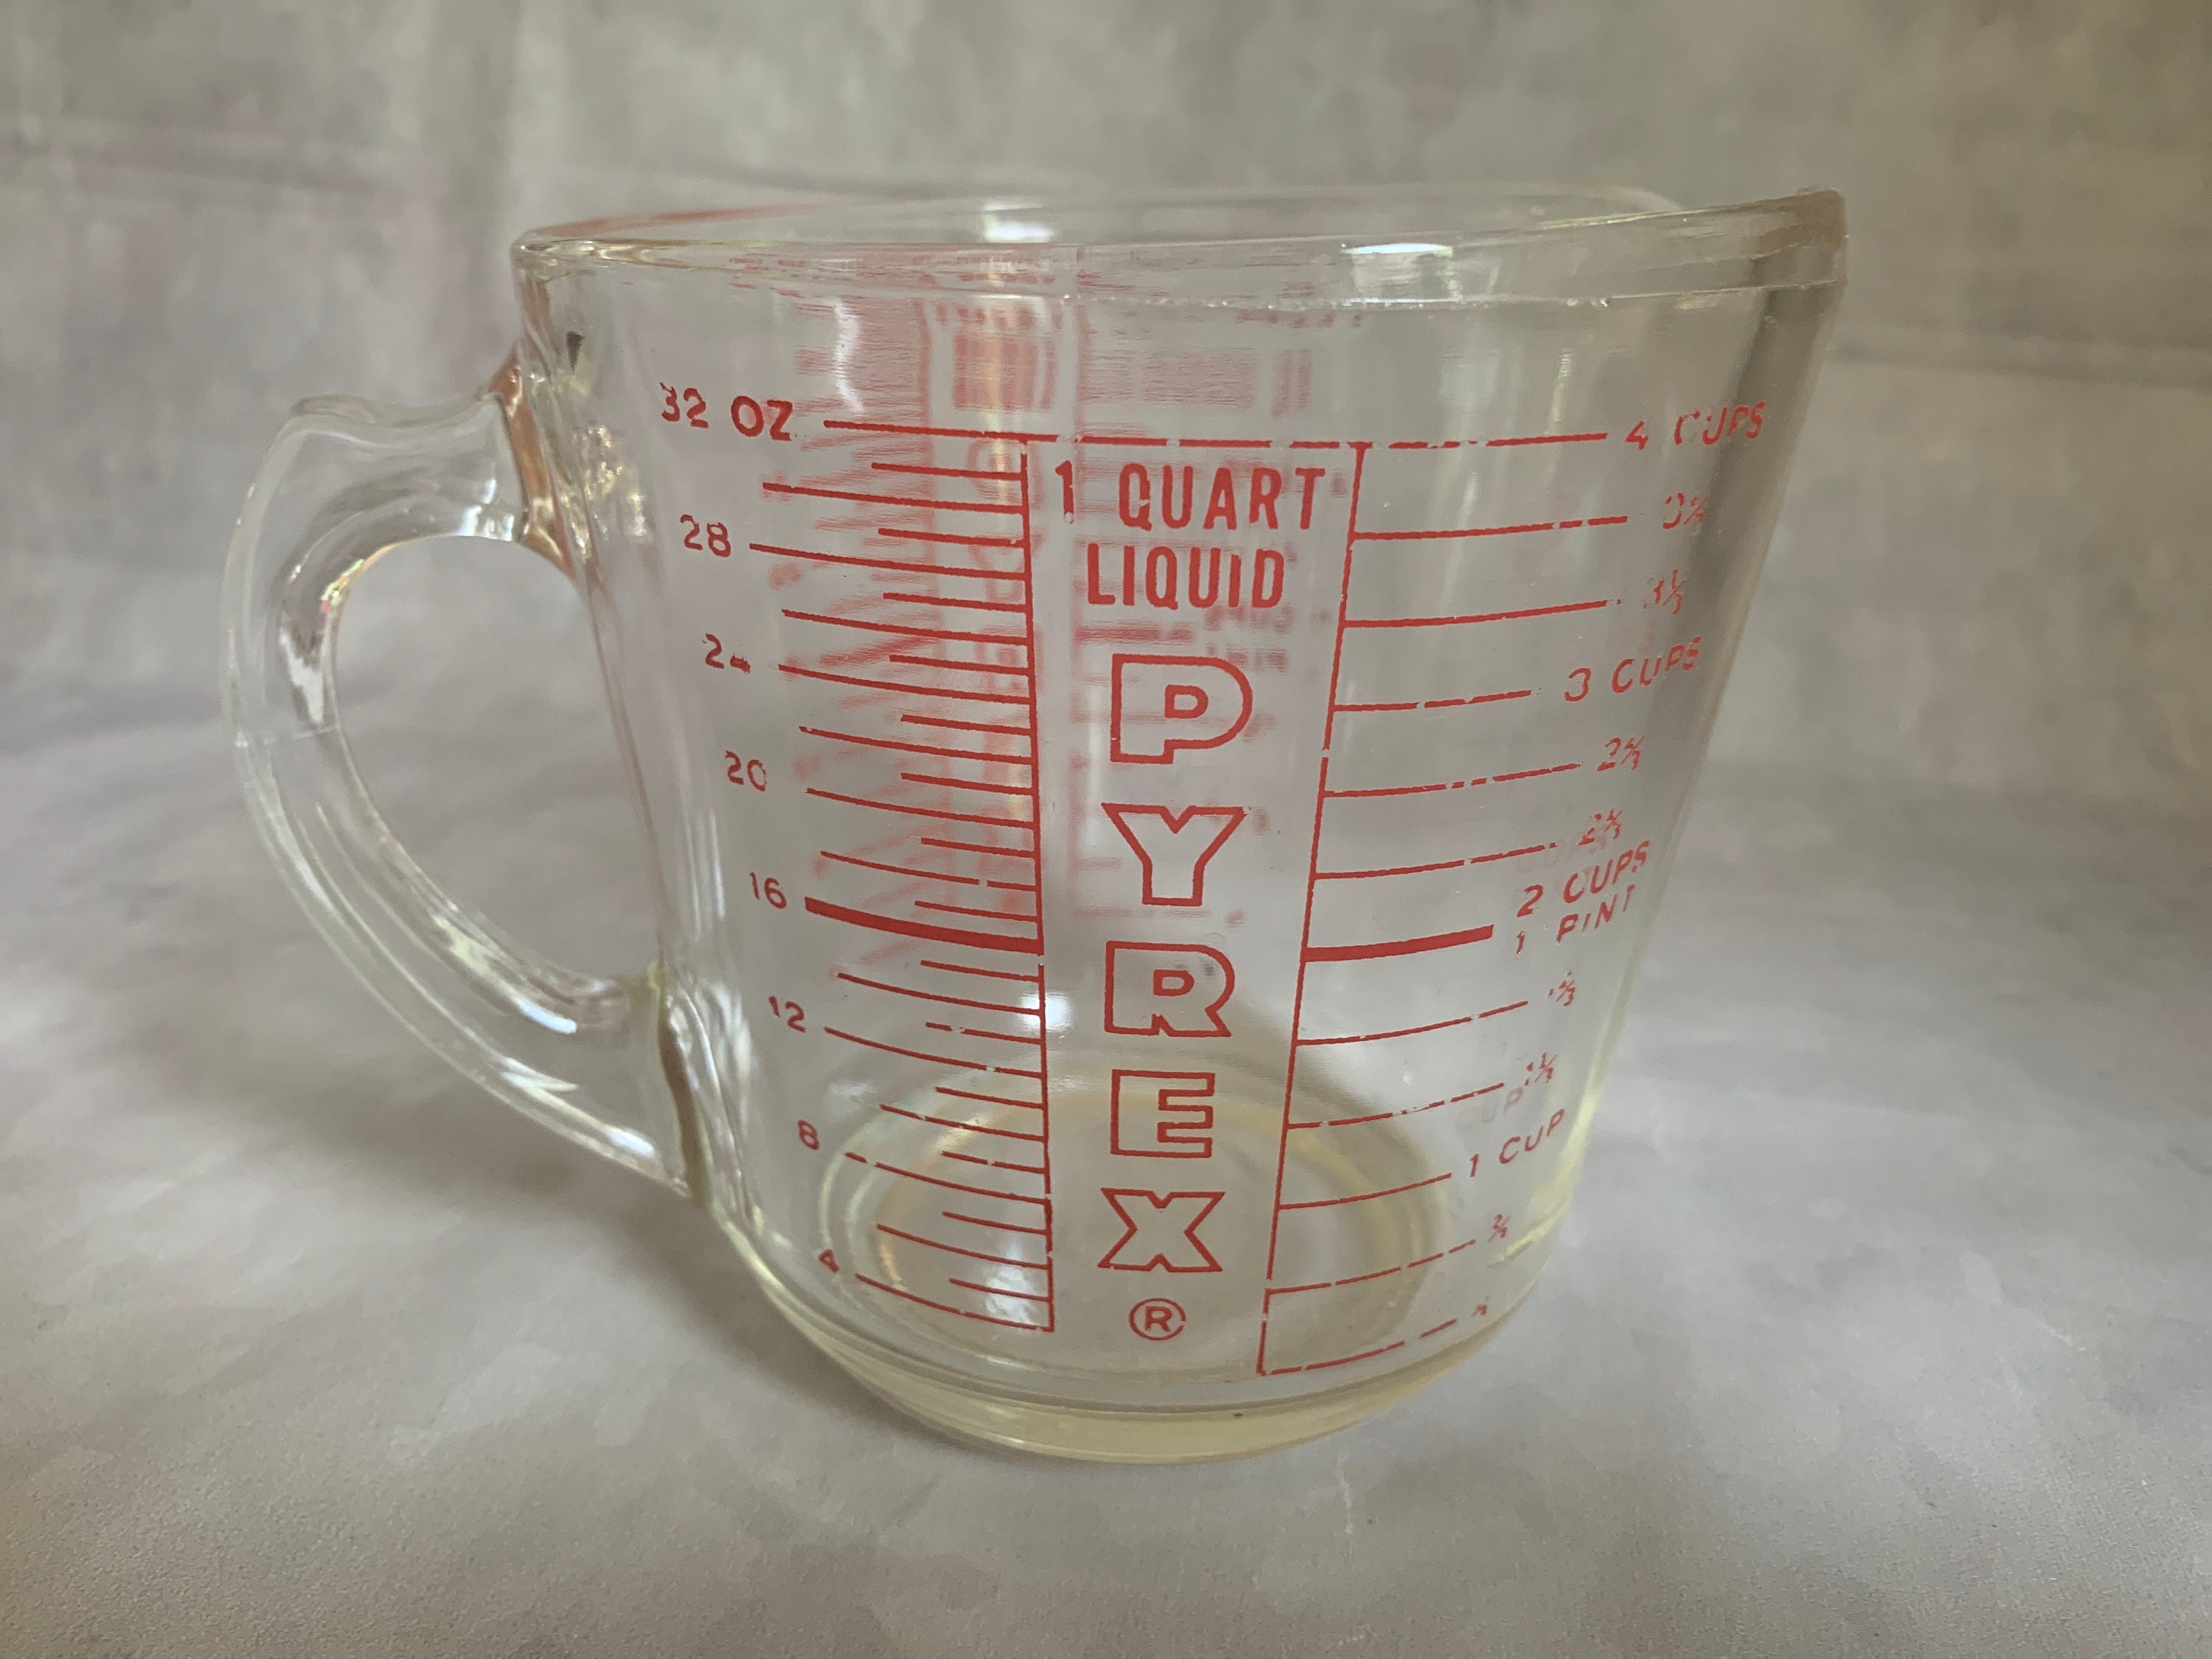 Pyrex 4 Cup 32 Oz 1 L Metric Glass Microwavable Mixing Measuring Cup USA  Made